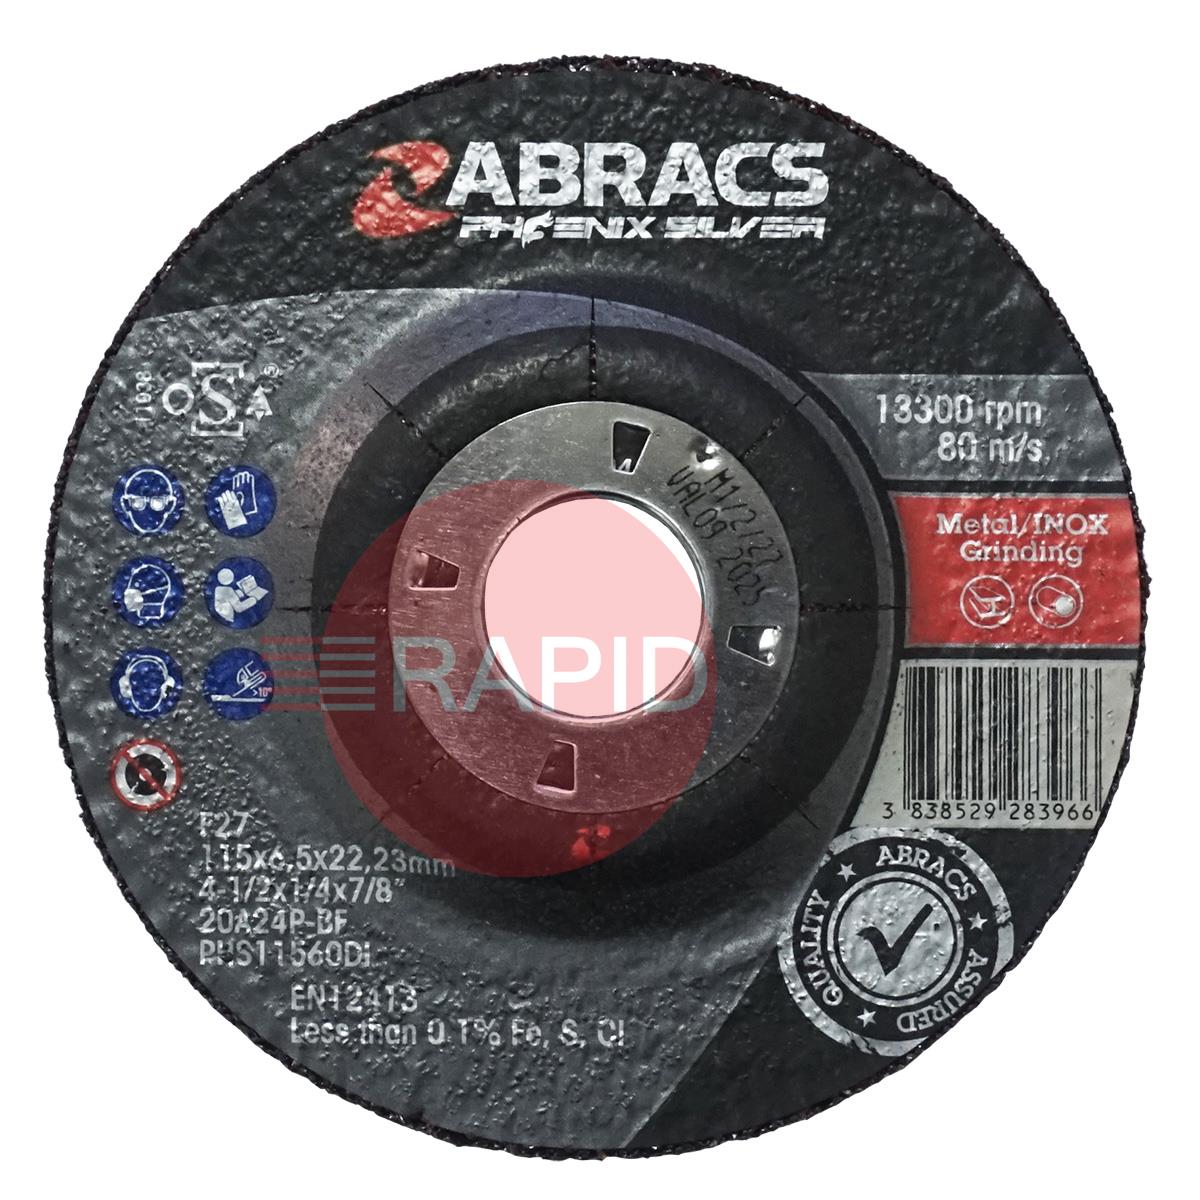 PHS11560DI  Abracs Phoenix Silver 115mm (4.5) Depressed Centre Grinding Disc 6.5mm Thick. Grade 20A24P Inox-BF for Steel & Stainless Steel.